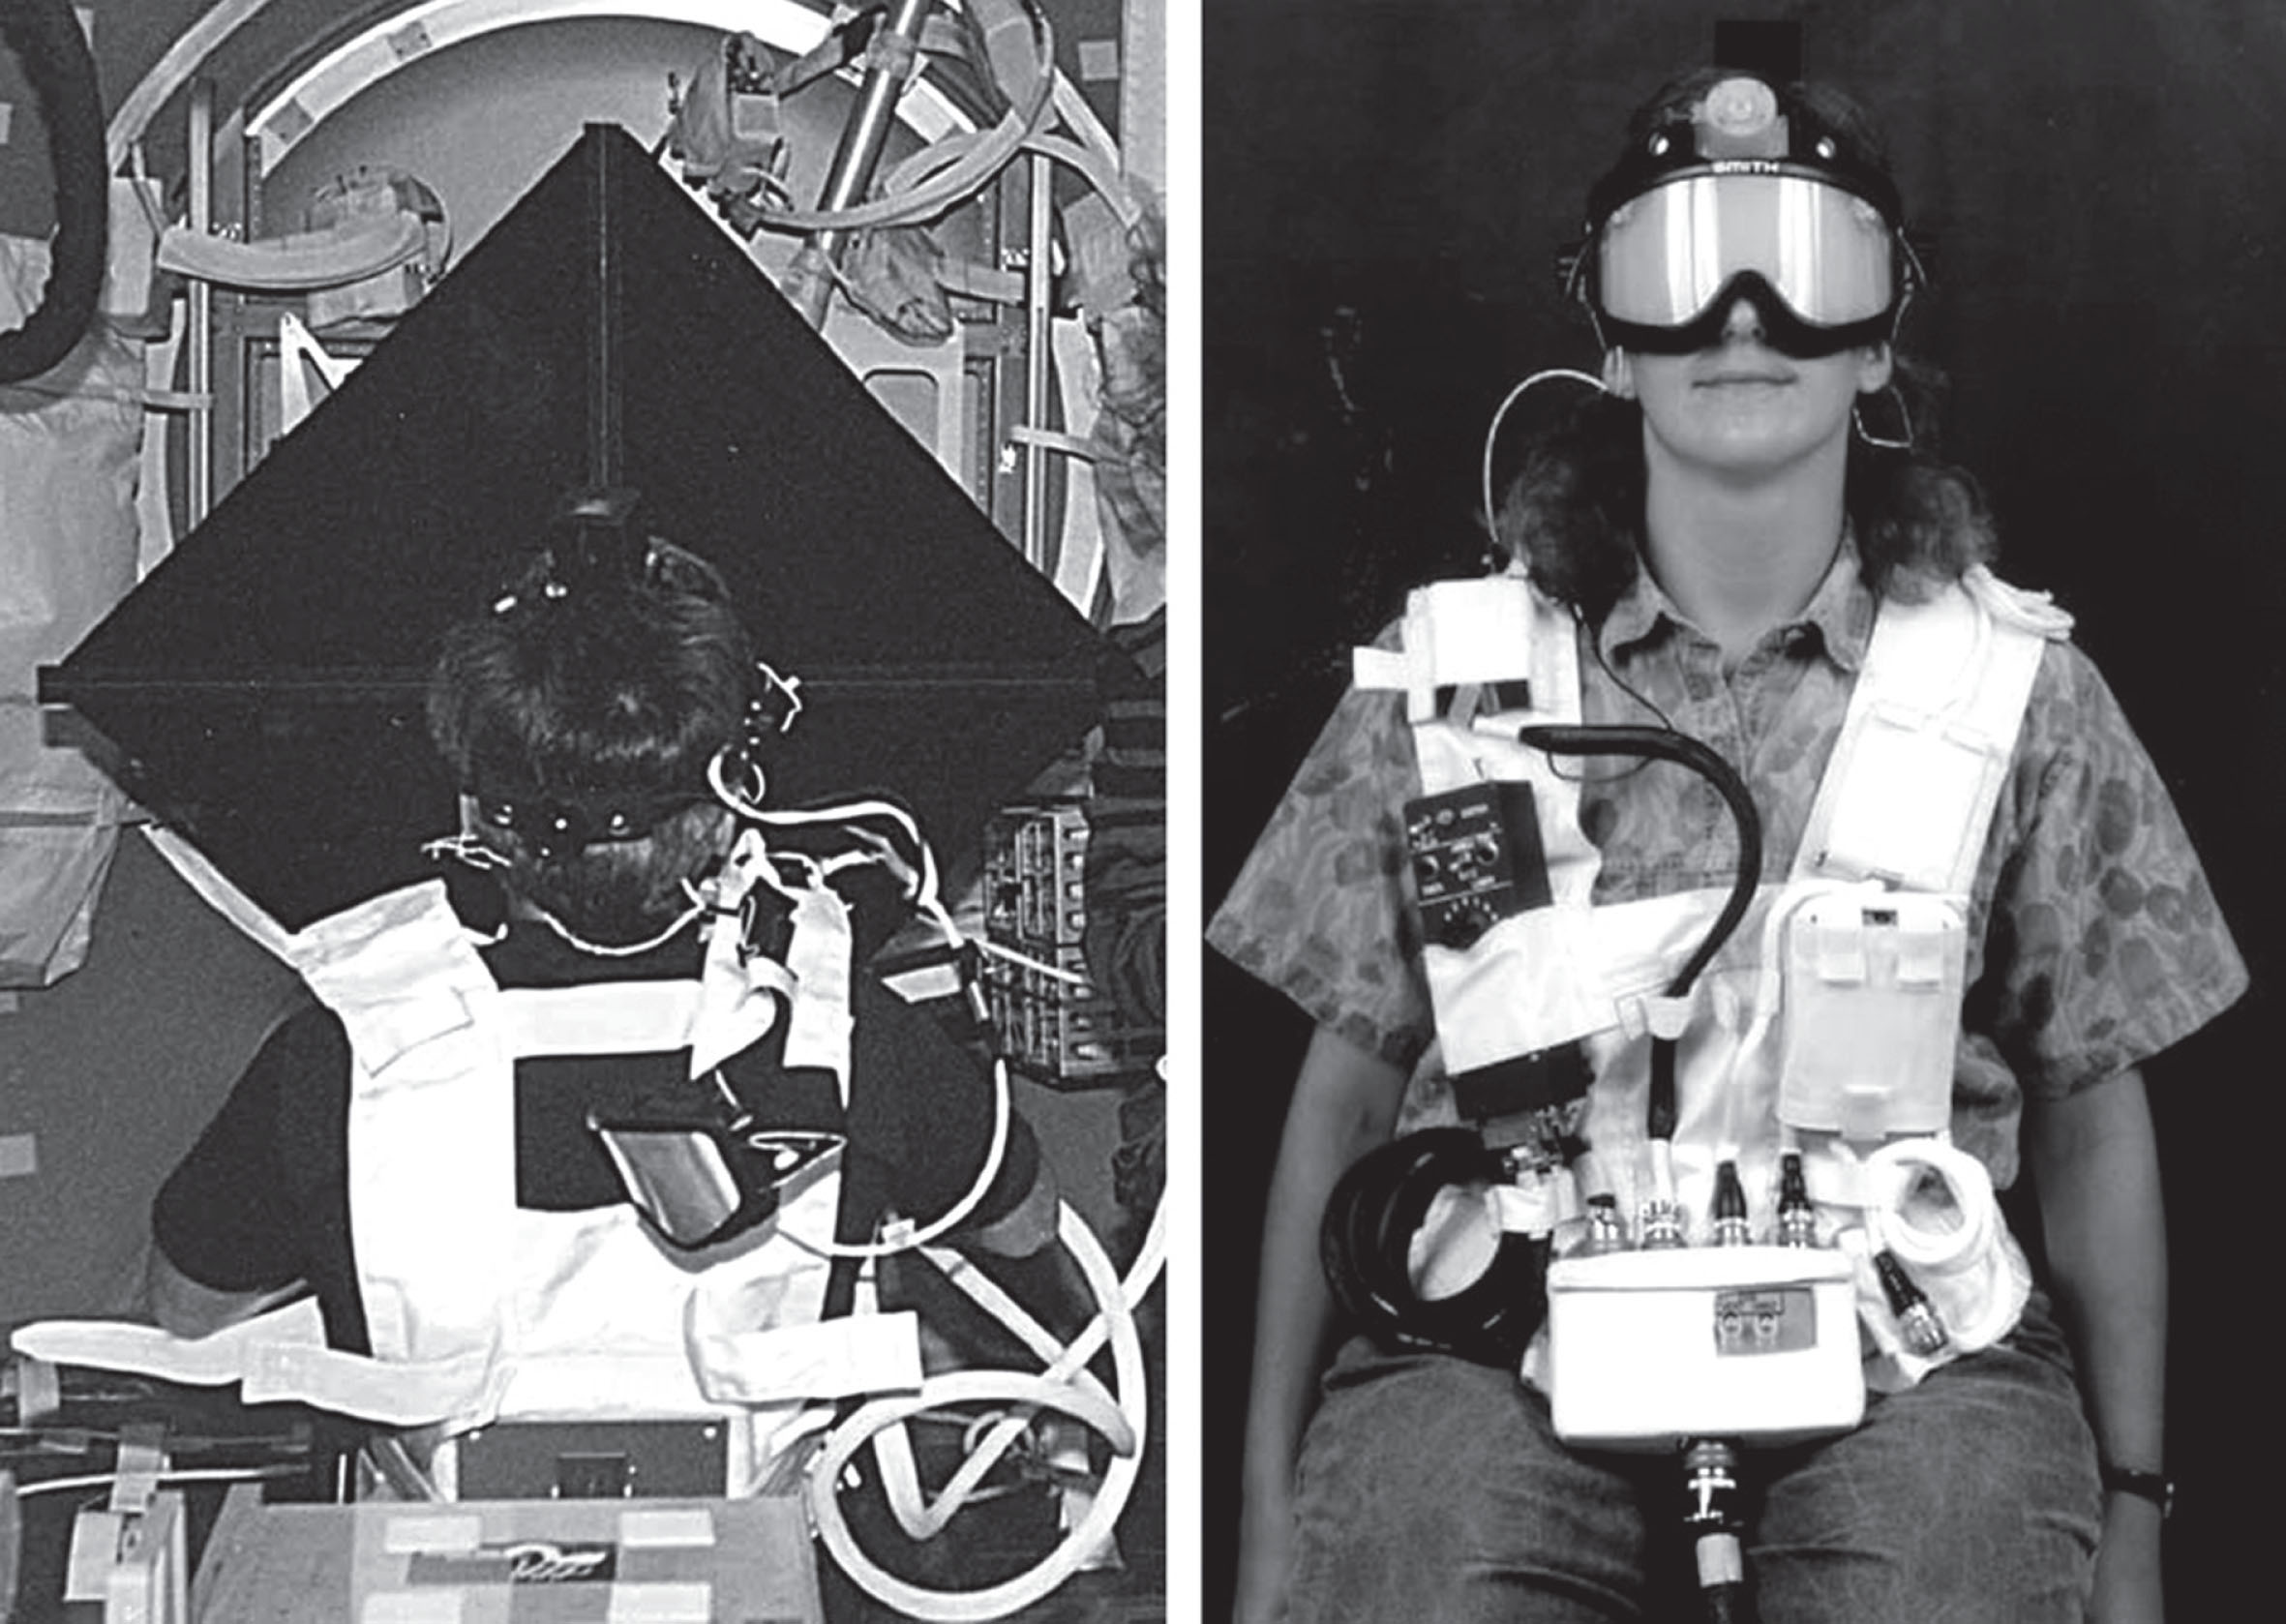 Left. Photograph showing a crewmember performing the experiment on board the Space Shuttle. The rate sensors housing unit is seen on the top of subject’s head. Directly in front of the subject is the cruciform target display used for head and eye calibrations, and for the presentation of the central target during head oscillations. Right. Photograph showing the head-mounted laser for head position calibration and the goggles that can occlude the subject’s vision. The black box is the controller used by the operator to control the visual display, the goggles occluding, and the cassette tape recorder that plays the frequency-modulated tones used for pacing the head oscillations. Photos credit: NASA.